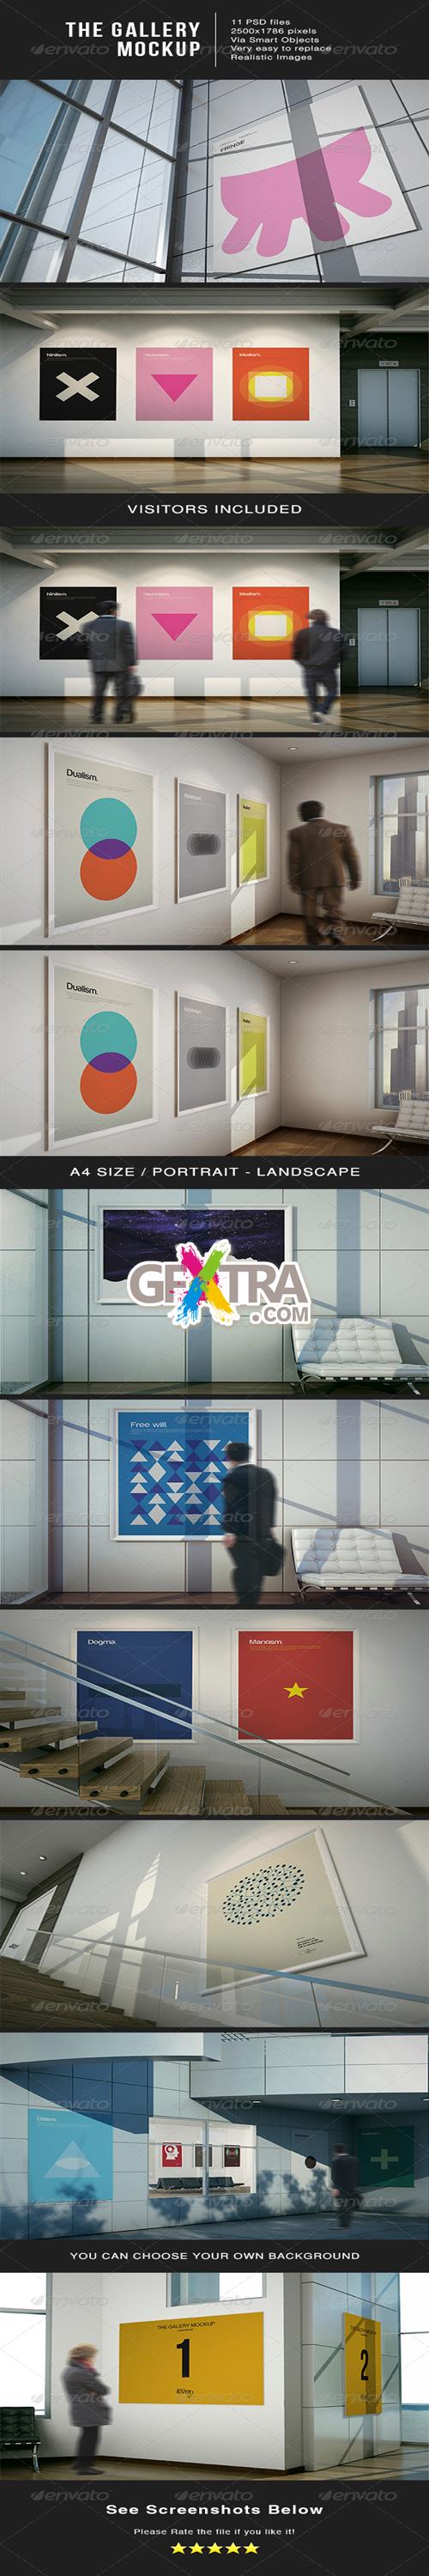 GraphicRiver - The Gallery MockUp